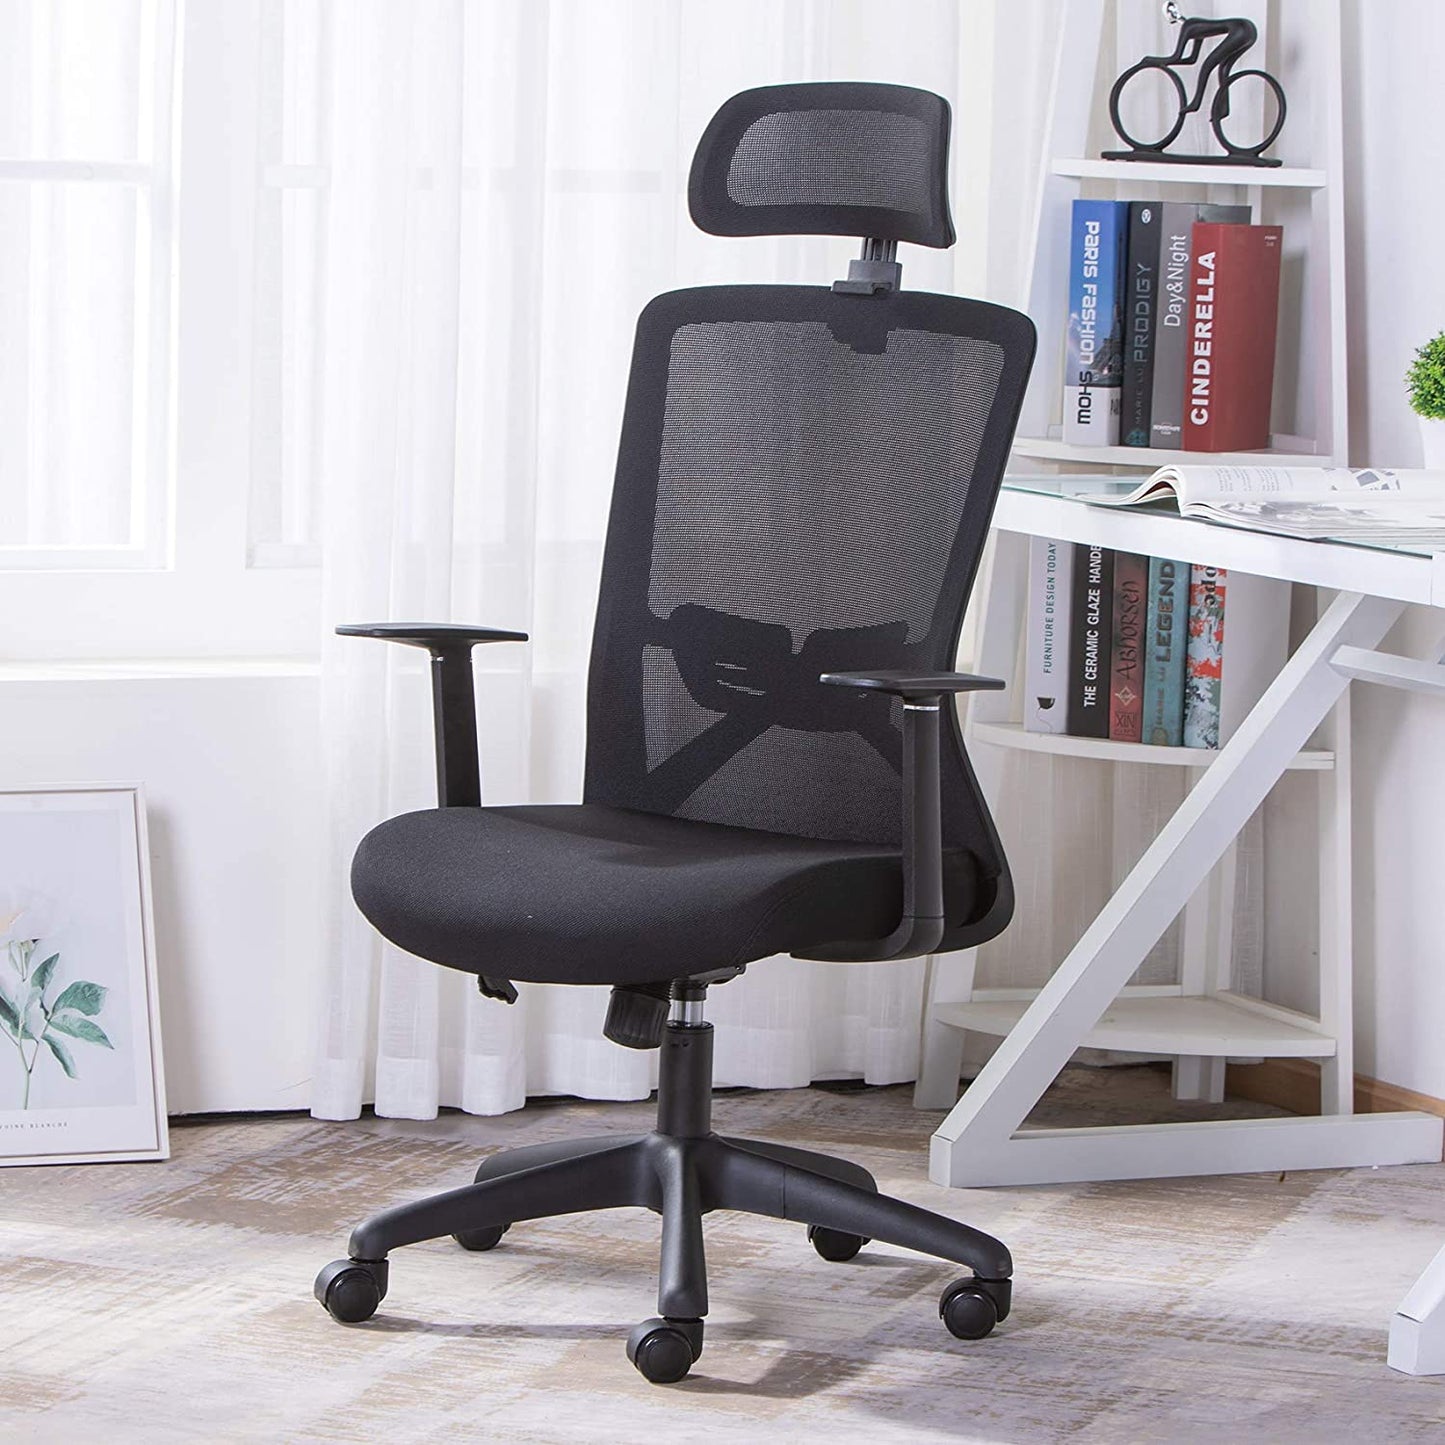 UNICOO - Home Office Chair Ergonomic Desk Chair High-Back Mesh Computer Chair Lumbar Support Comfortable Executive Adjustable Rolling Swivel Task Chair with Armrests (W-215C - Black)